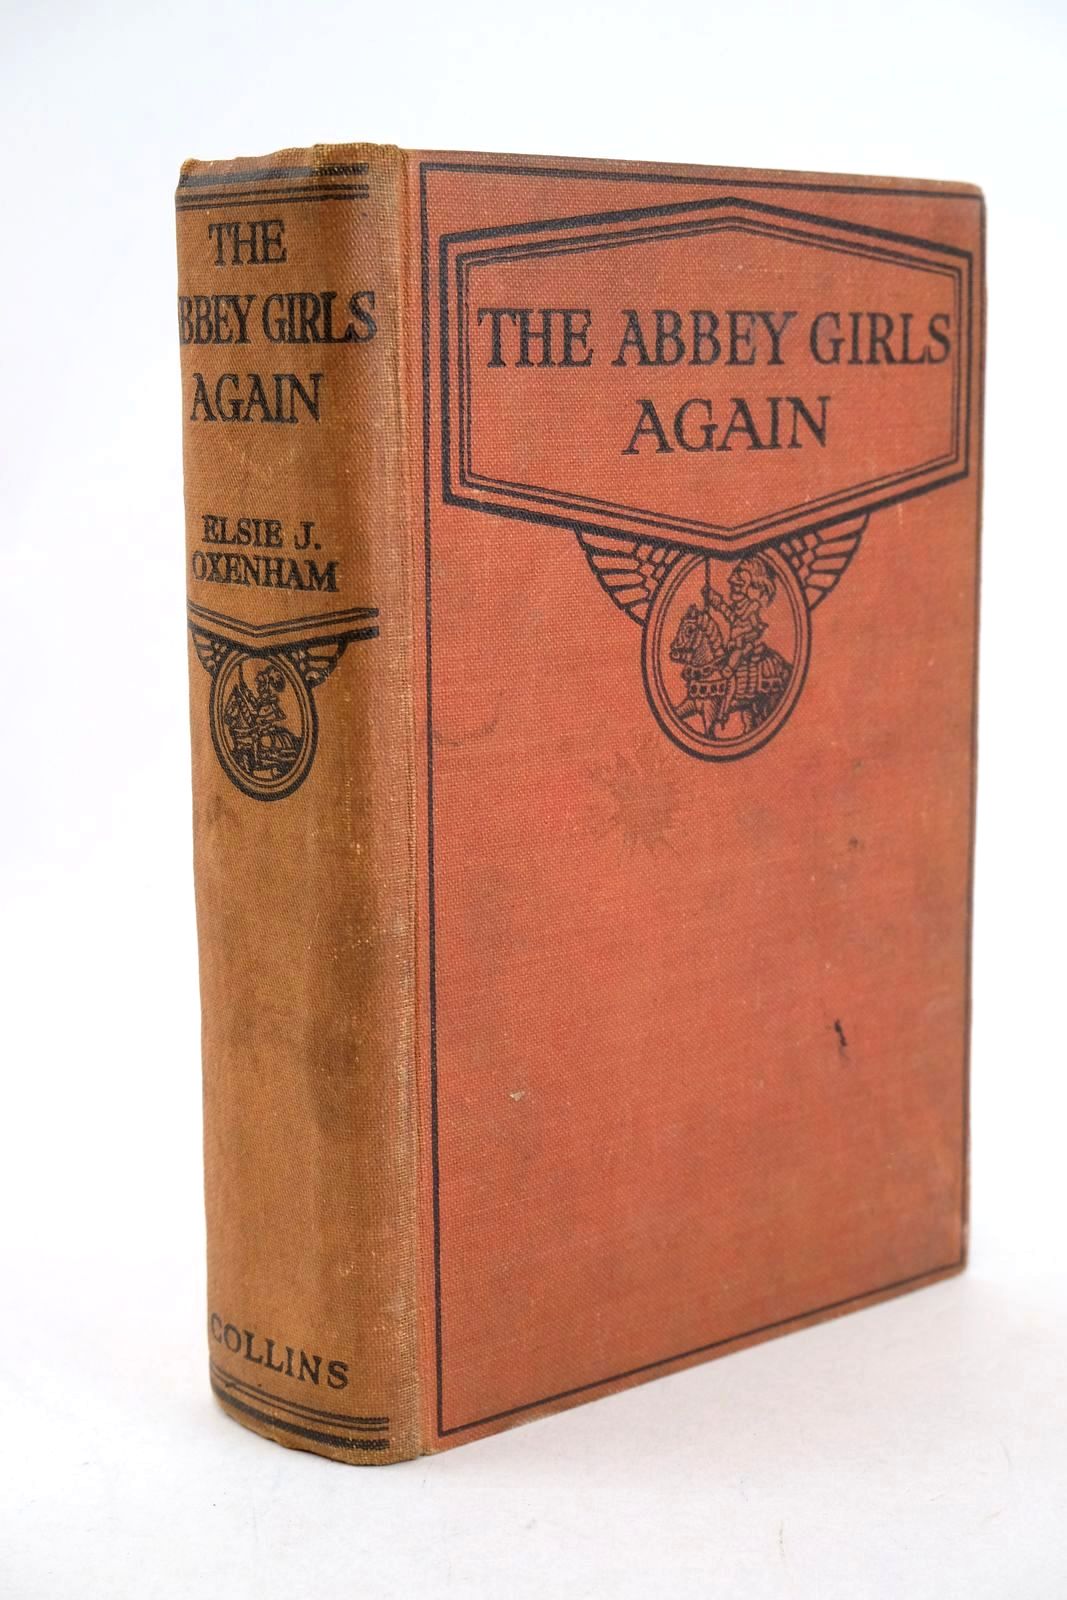 Photo of THE ABBEY GIRLS AGAIN written by Oxenham, Elsie J. illustrated by Wood, Elsie Anna published by Collins Clear-Type Press (STOCK CODE: 1326858)  for sale by Stella & Rose's Books